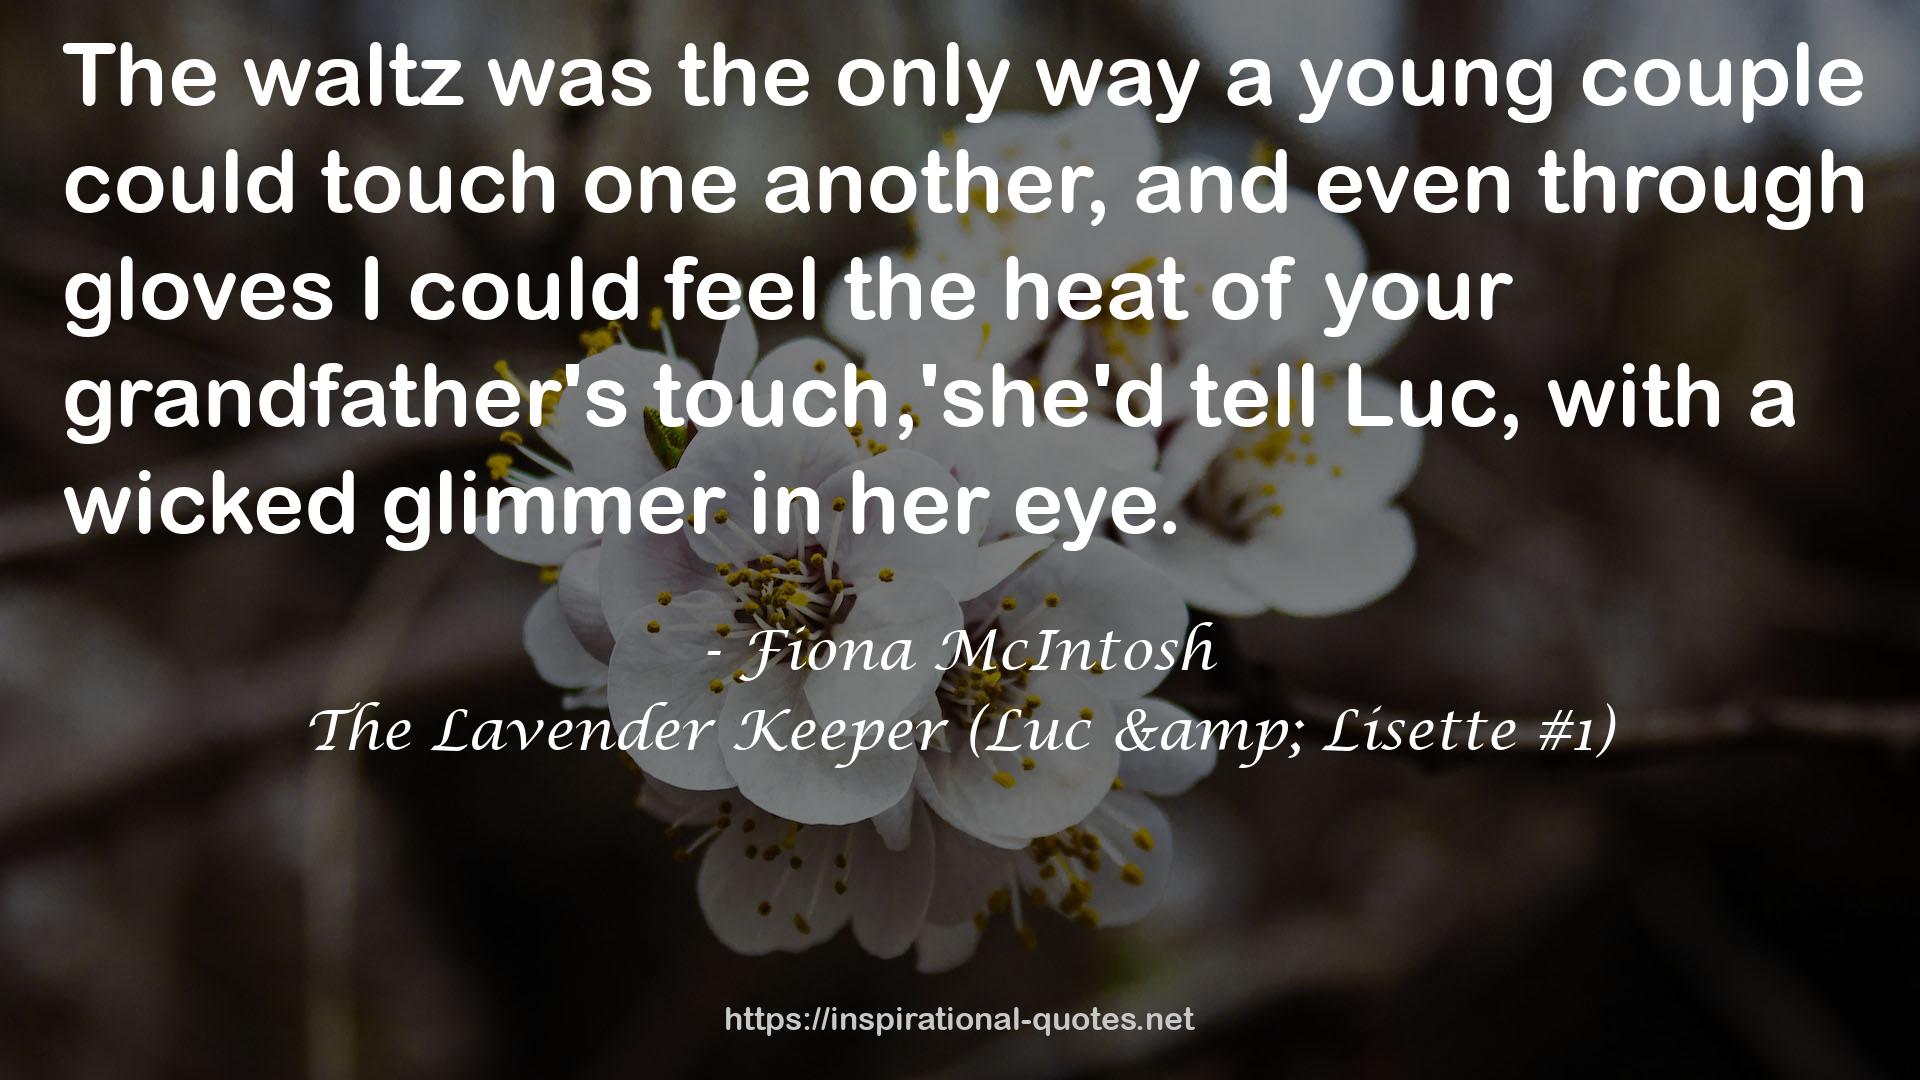 The Lavender Keeper (Luc & Lisette #1) QUOTES